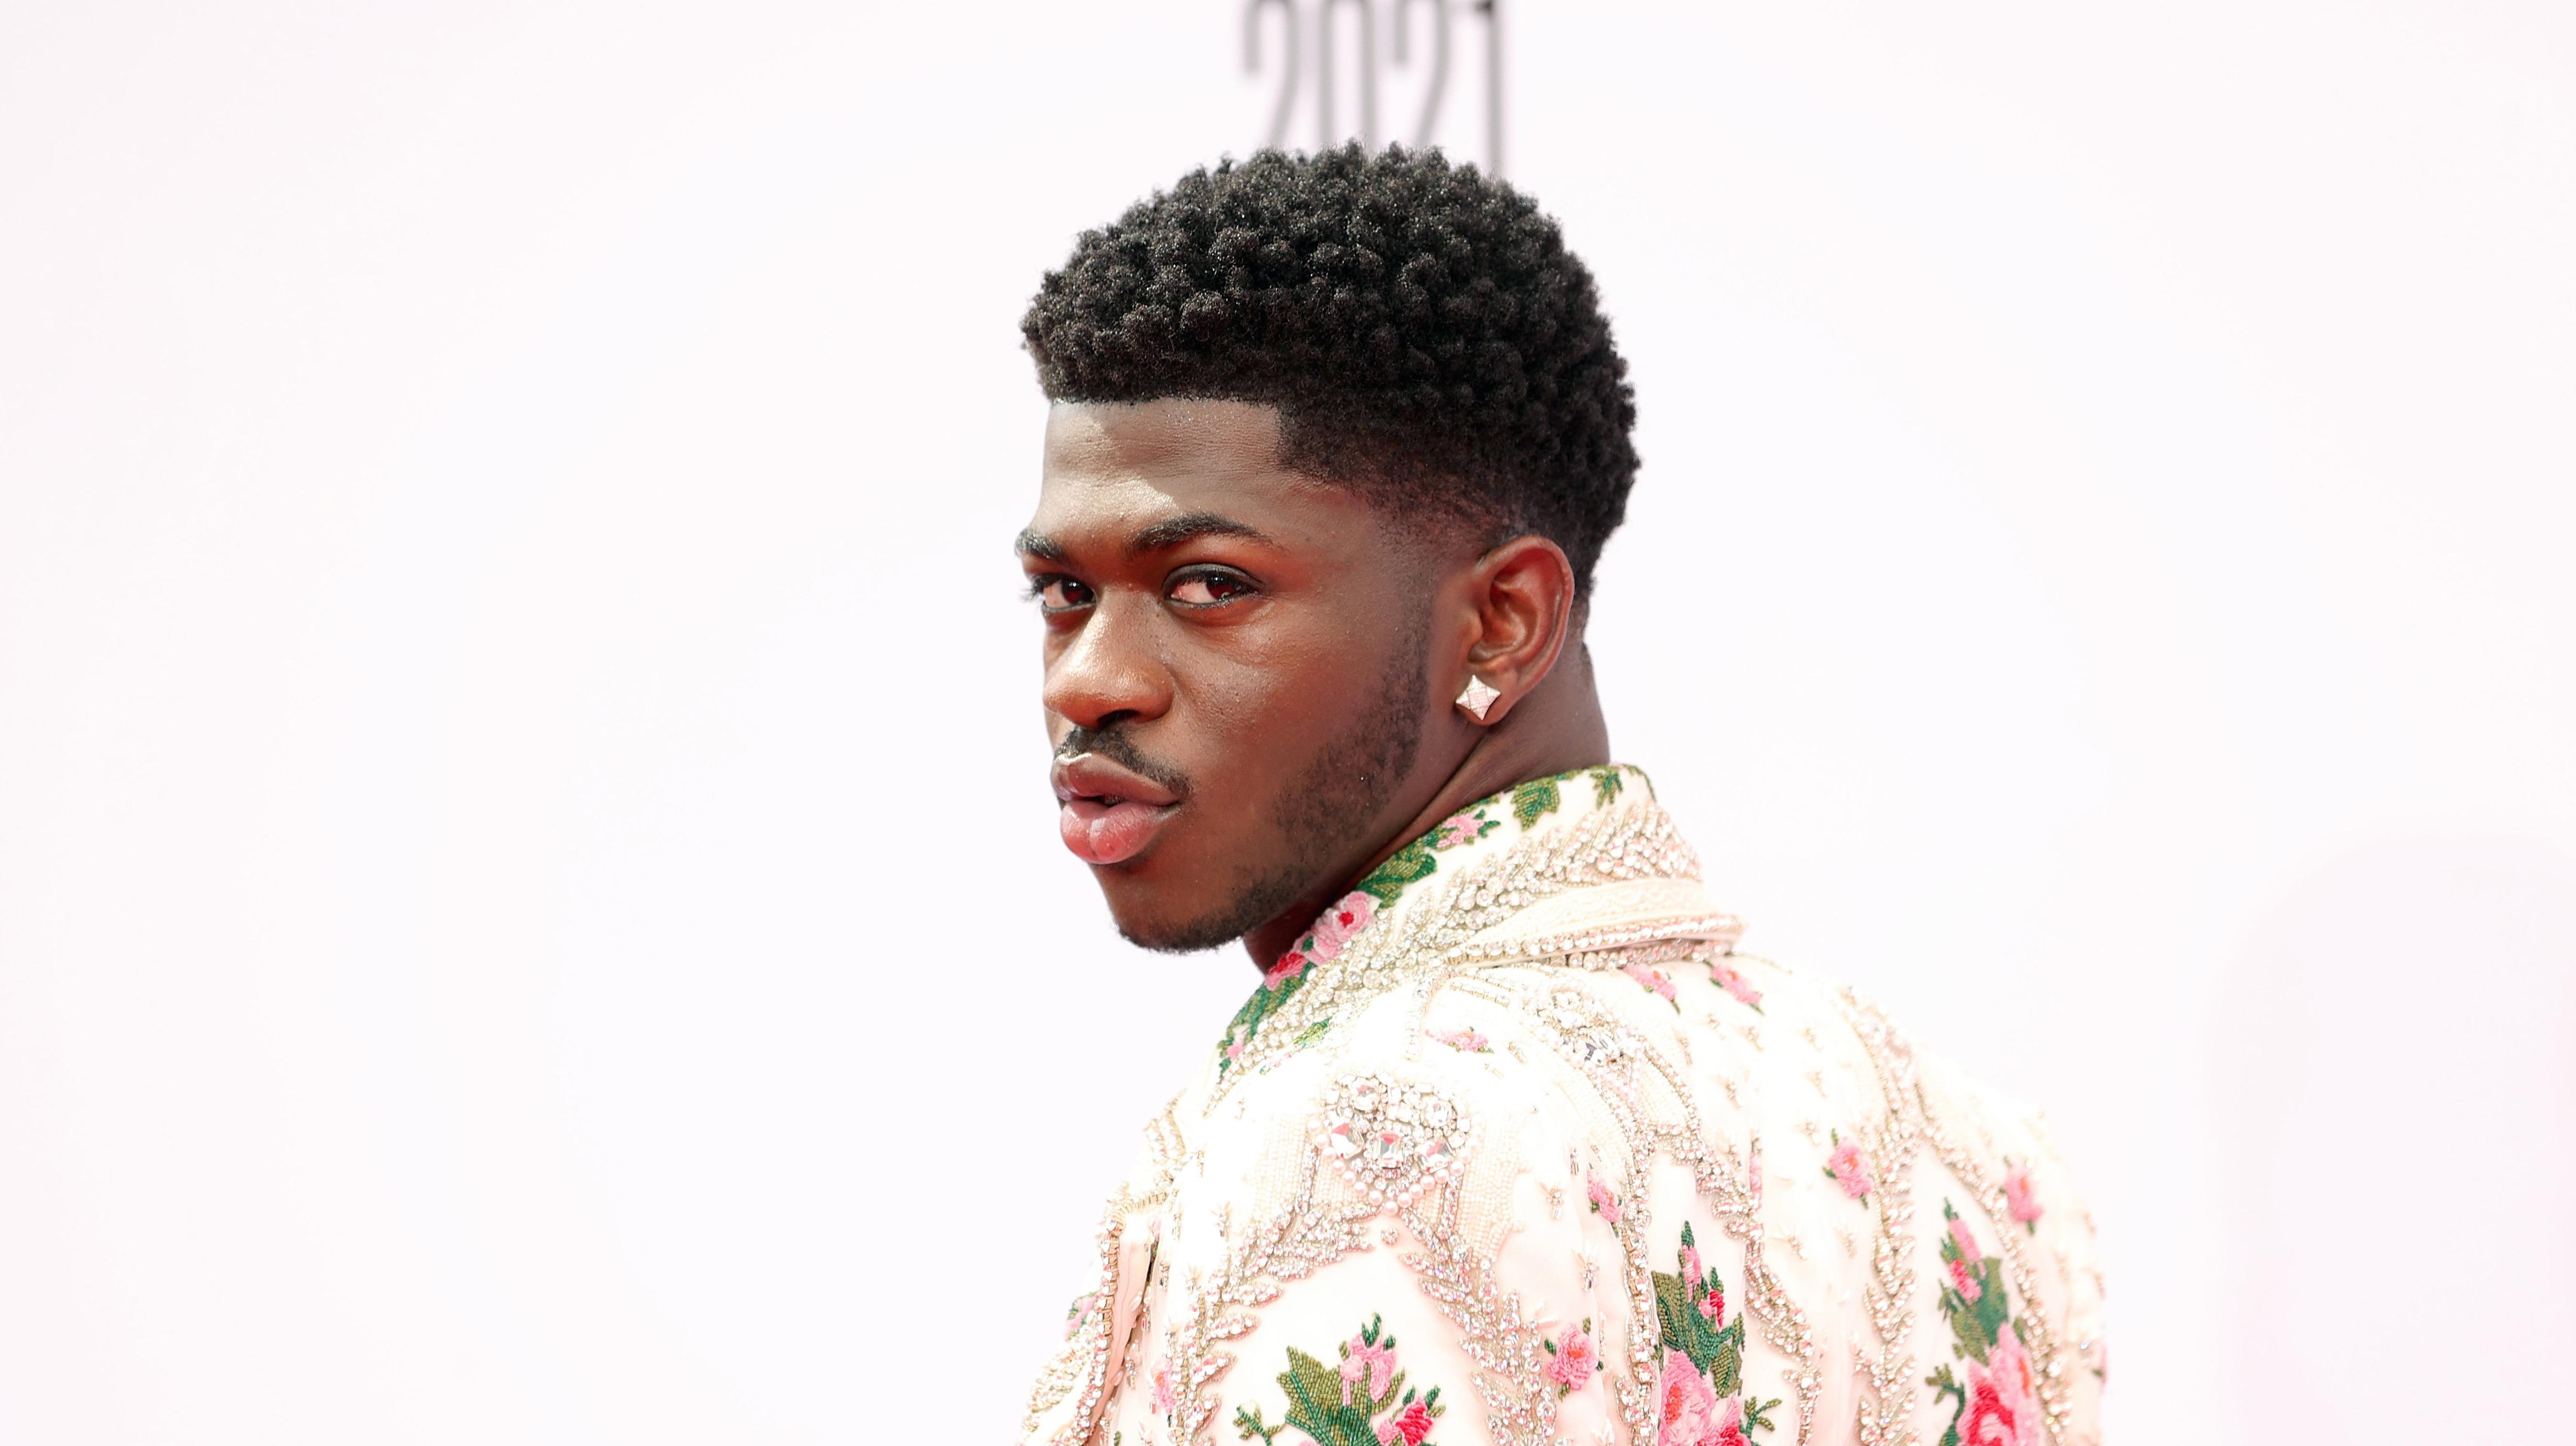 Lil Nas X is welcoming us to his MCU—Montero Cinematic Universe—with debut album announcement